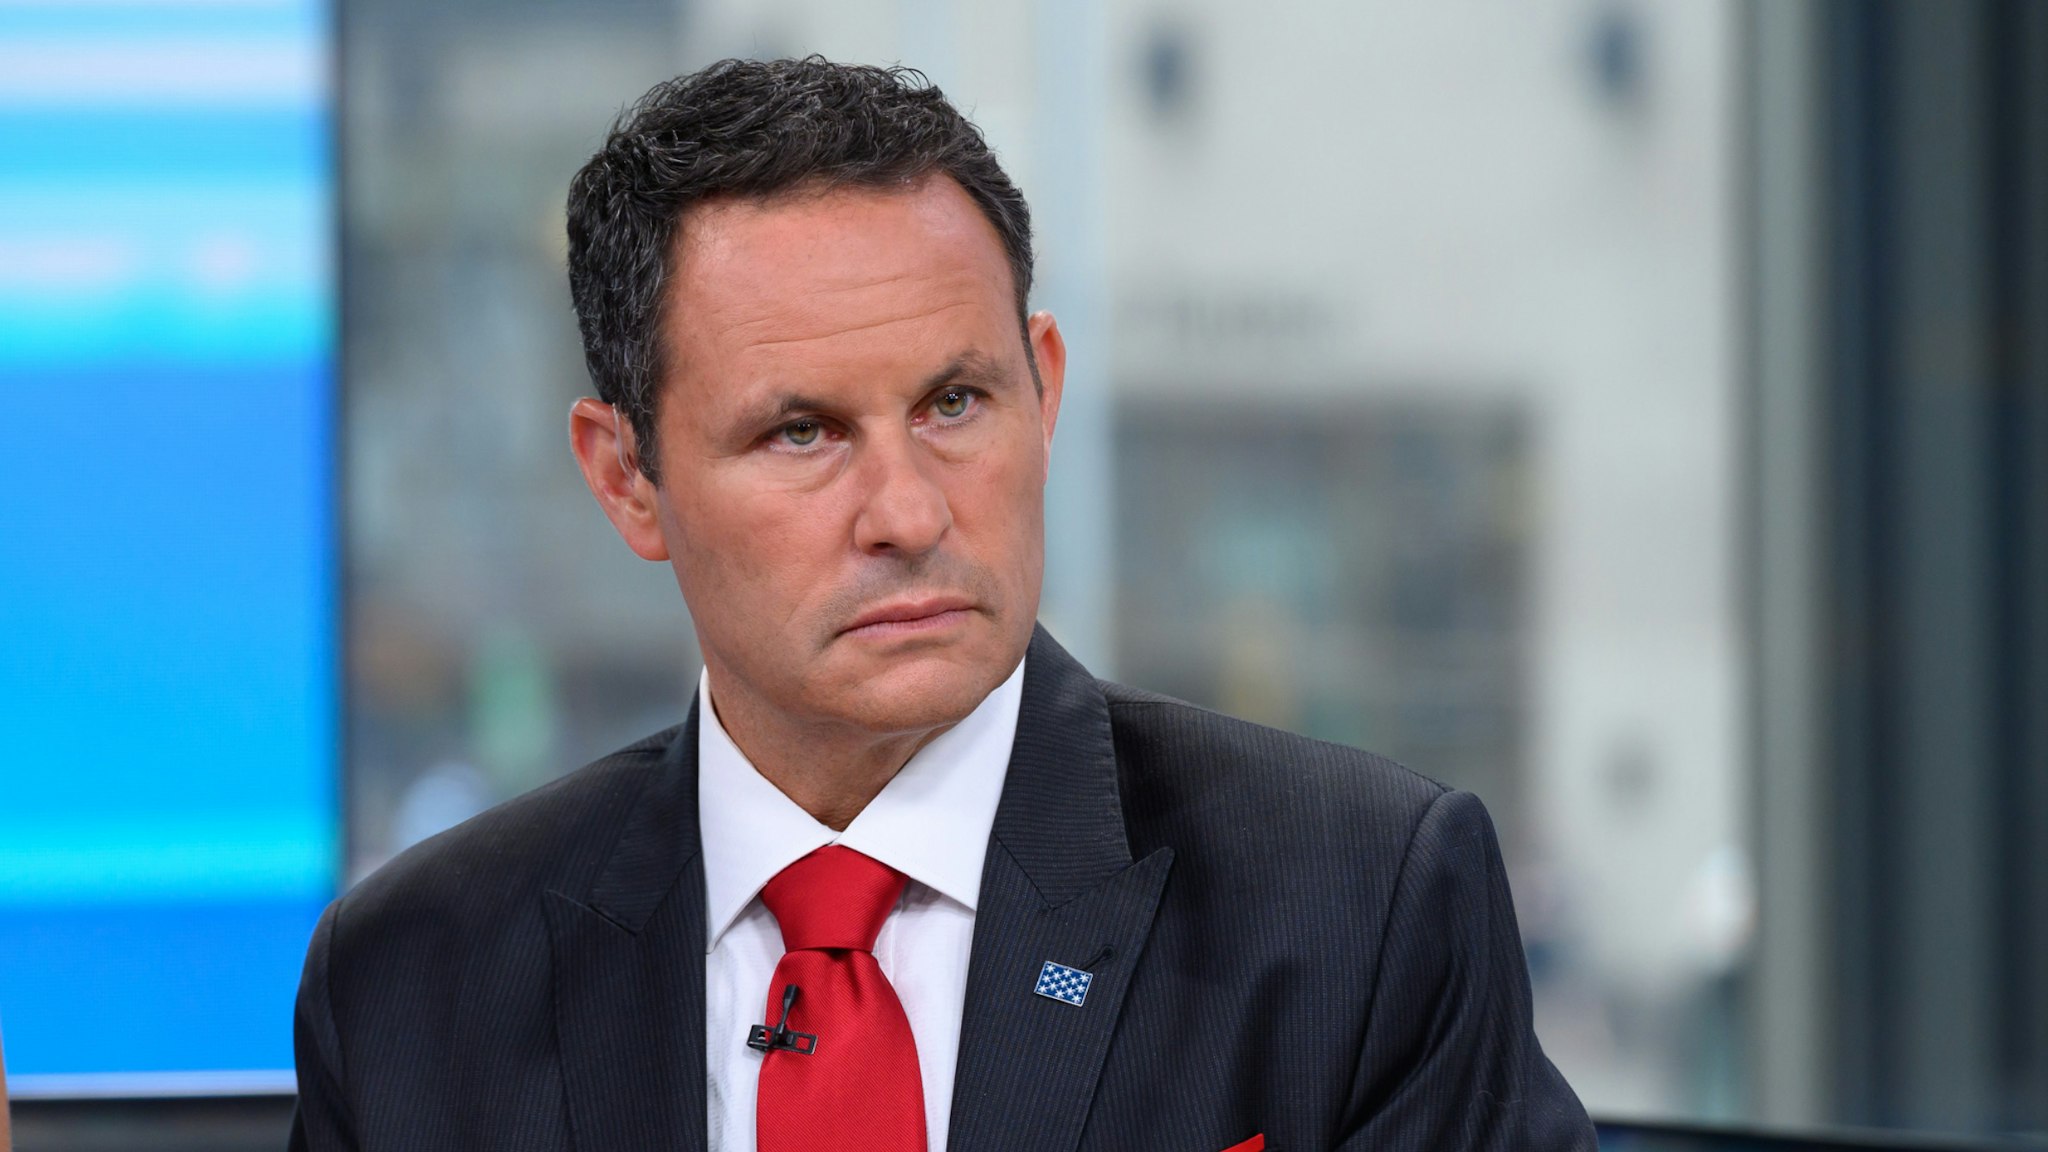 Brian Kilmeade is seen on set of Fox & Friends at Fox News Channel Studios on September 10, 2019 in New York City.